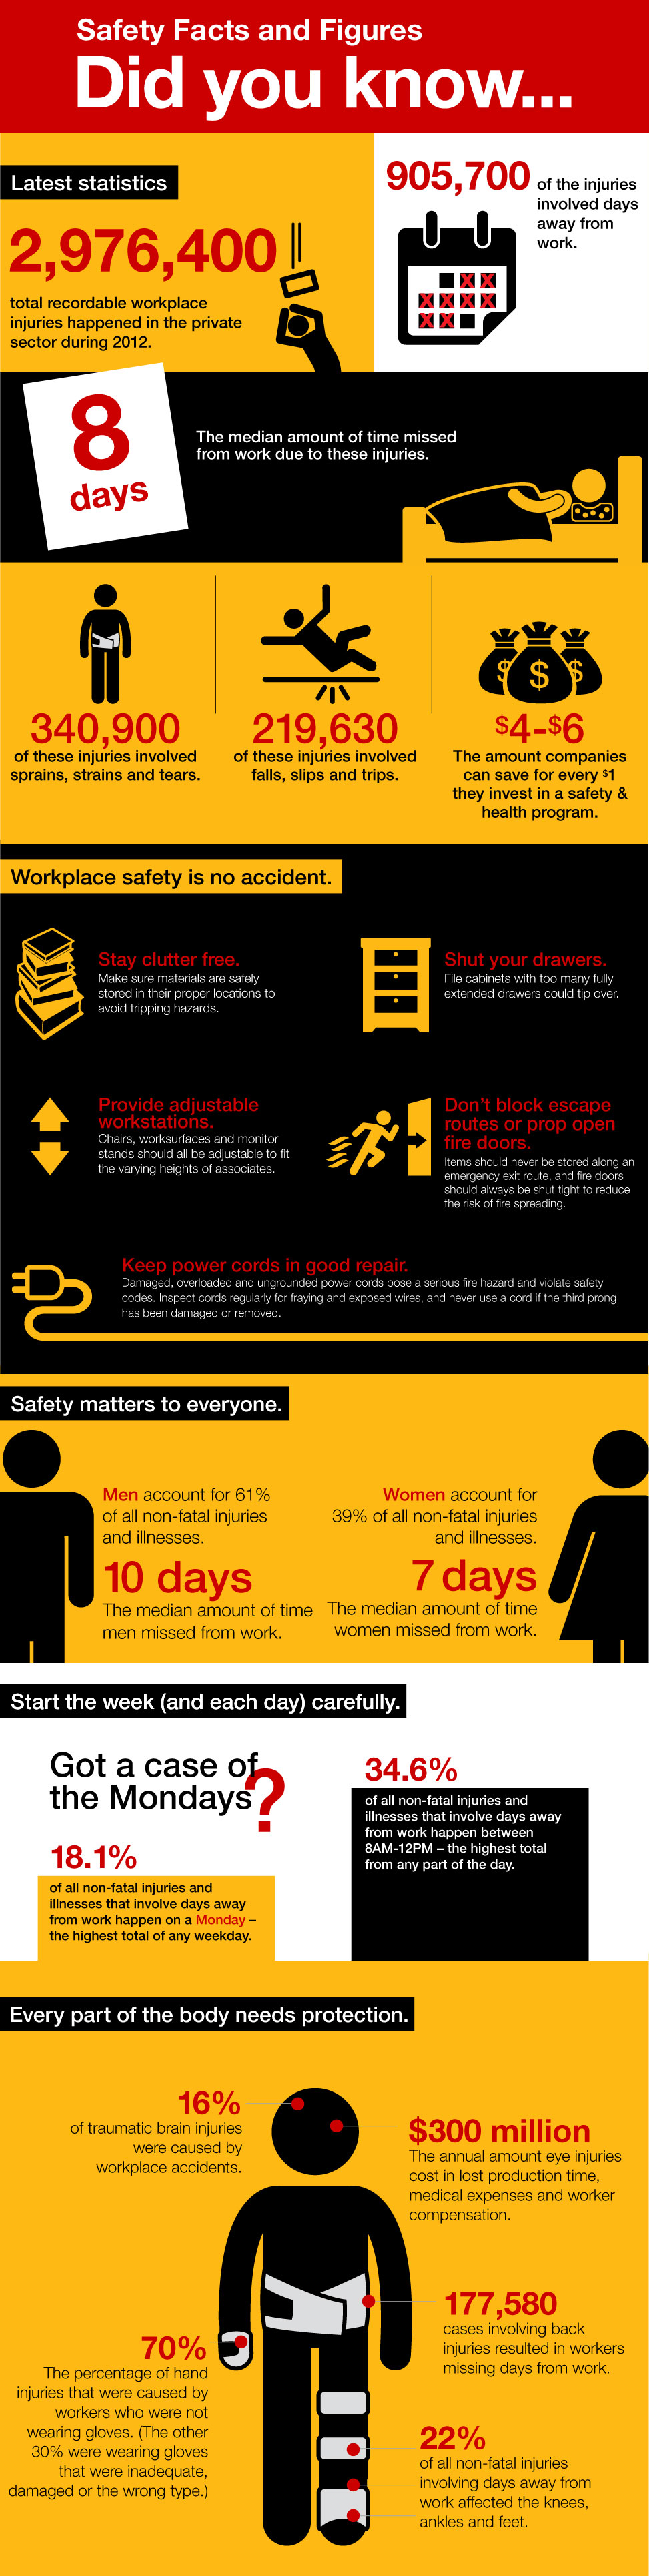 Workplace related safety: some statistics